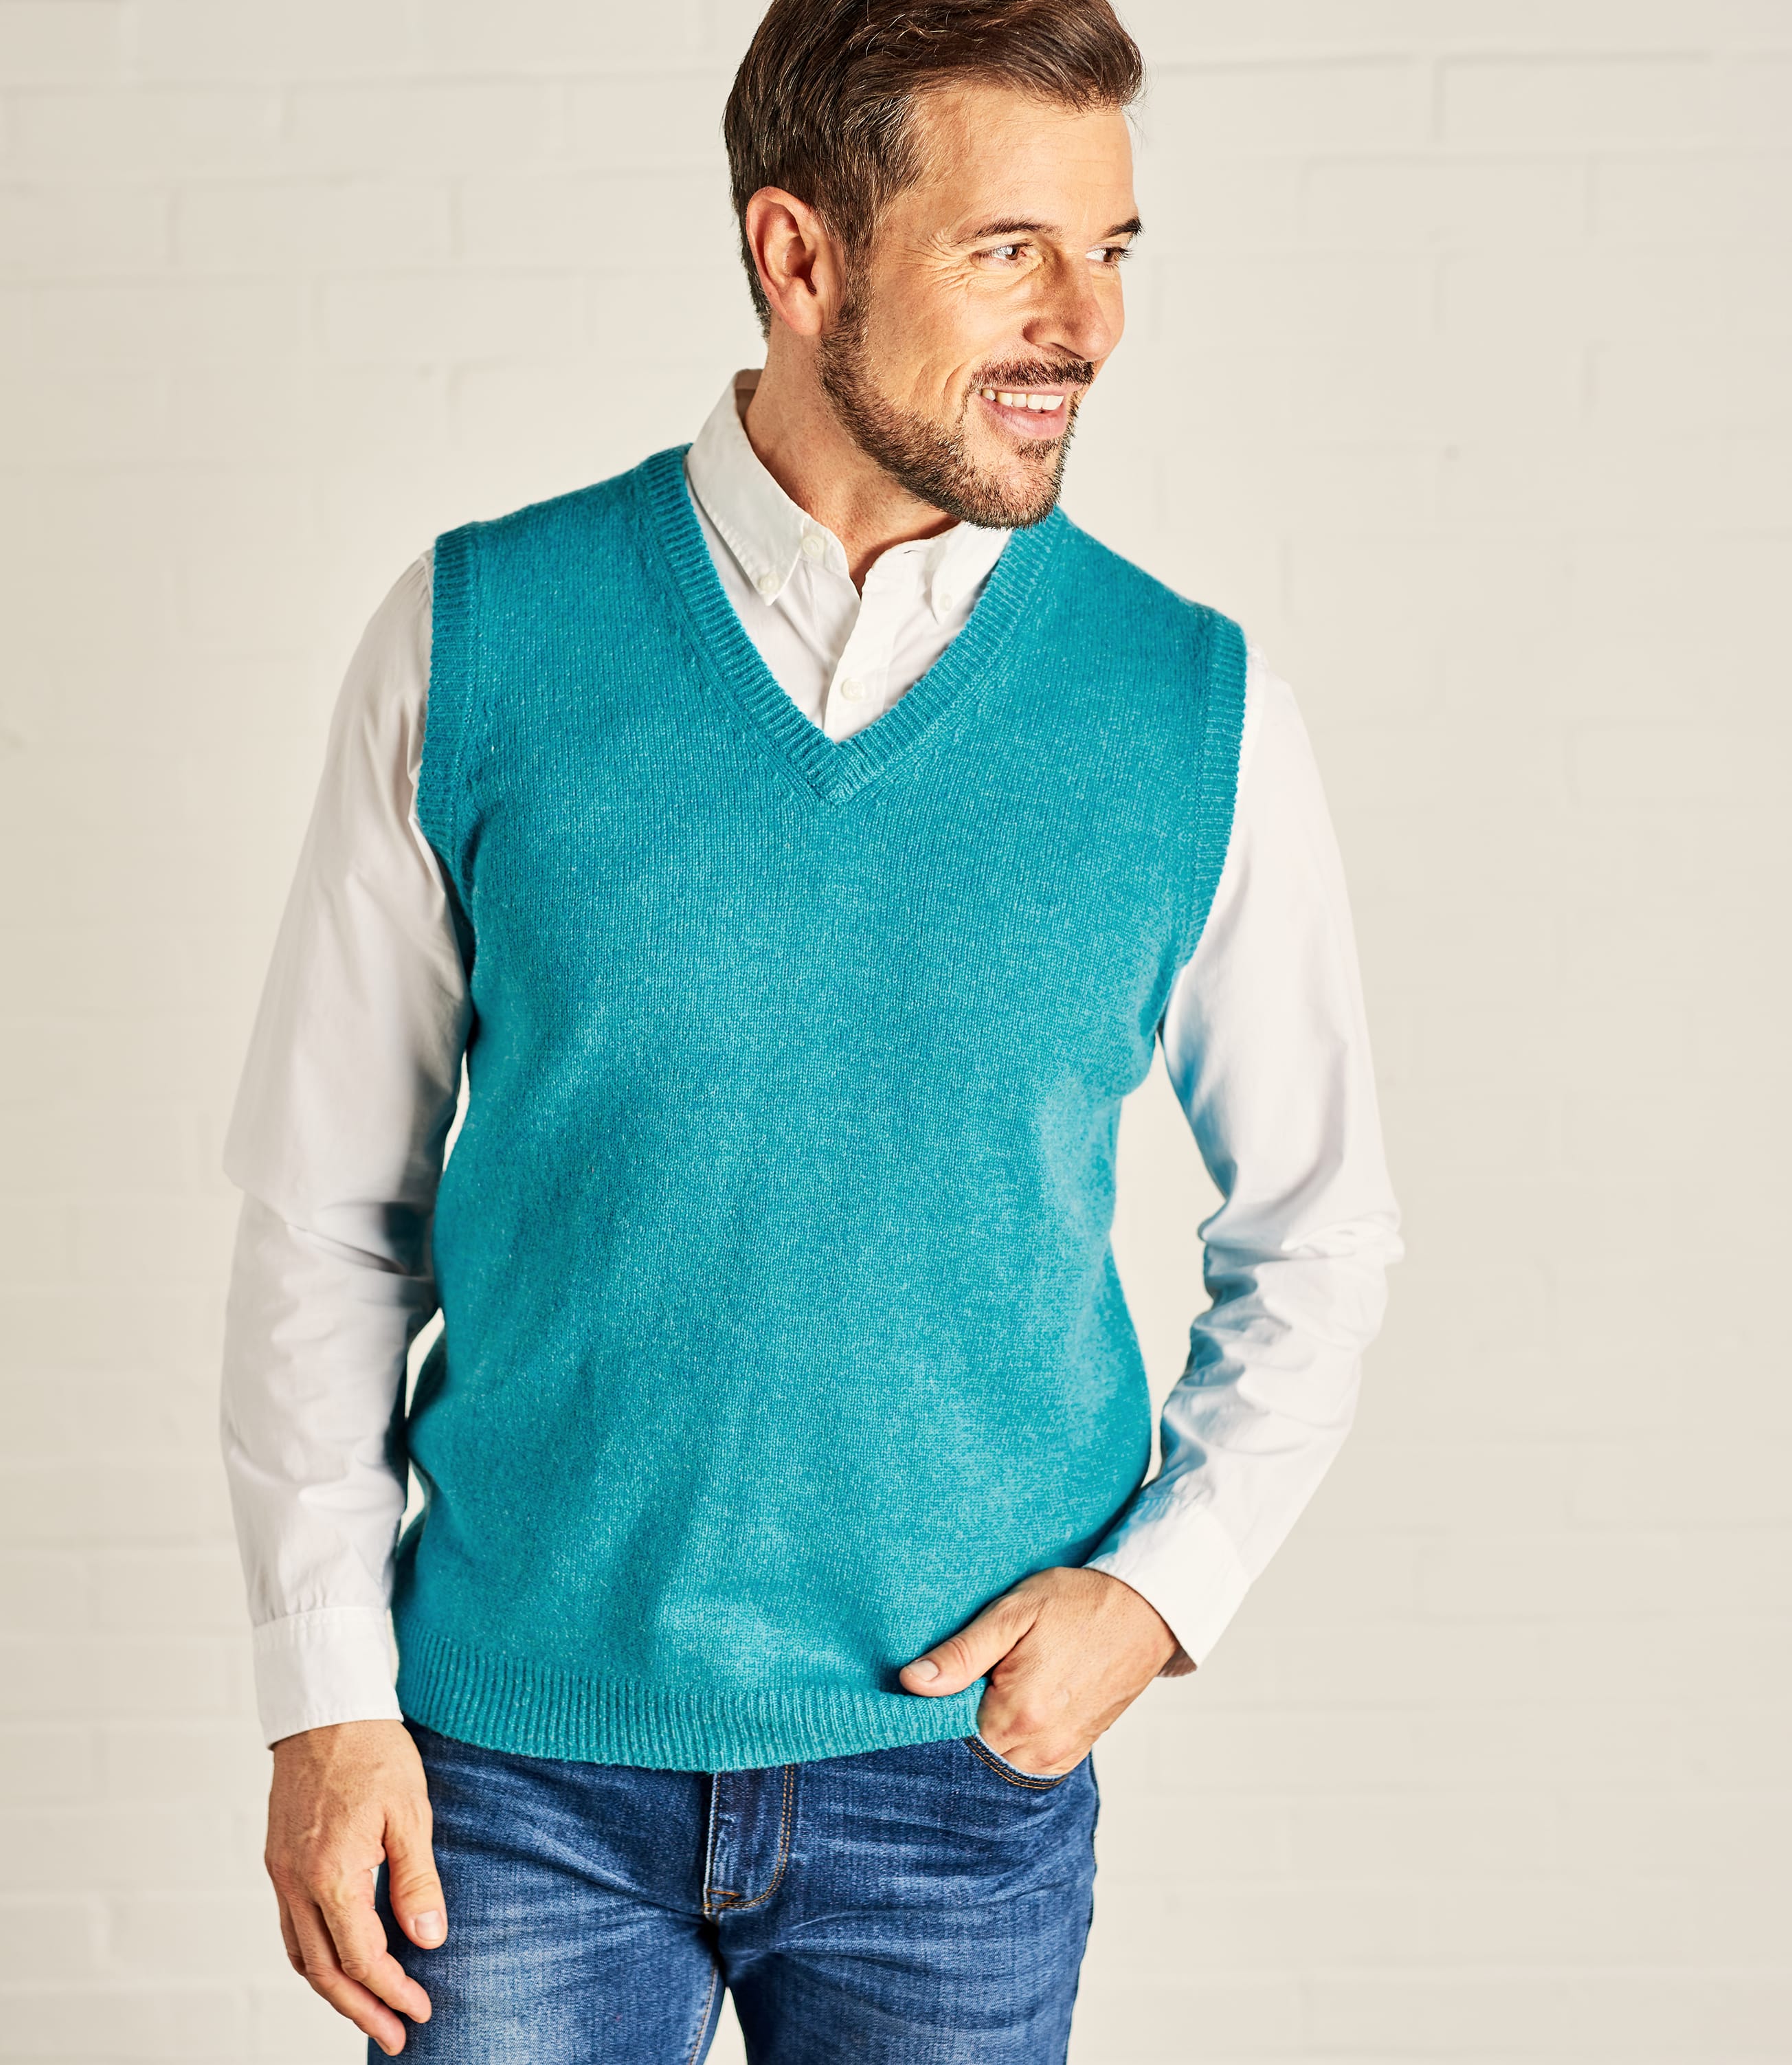 Men's Sleeveless Jumpers & Cardigans | WoolOvers UK